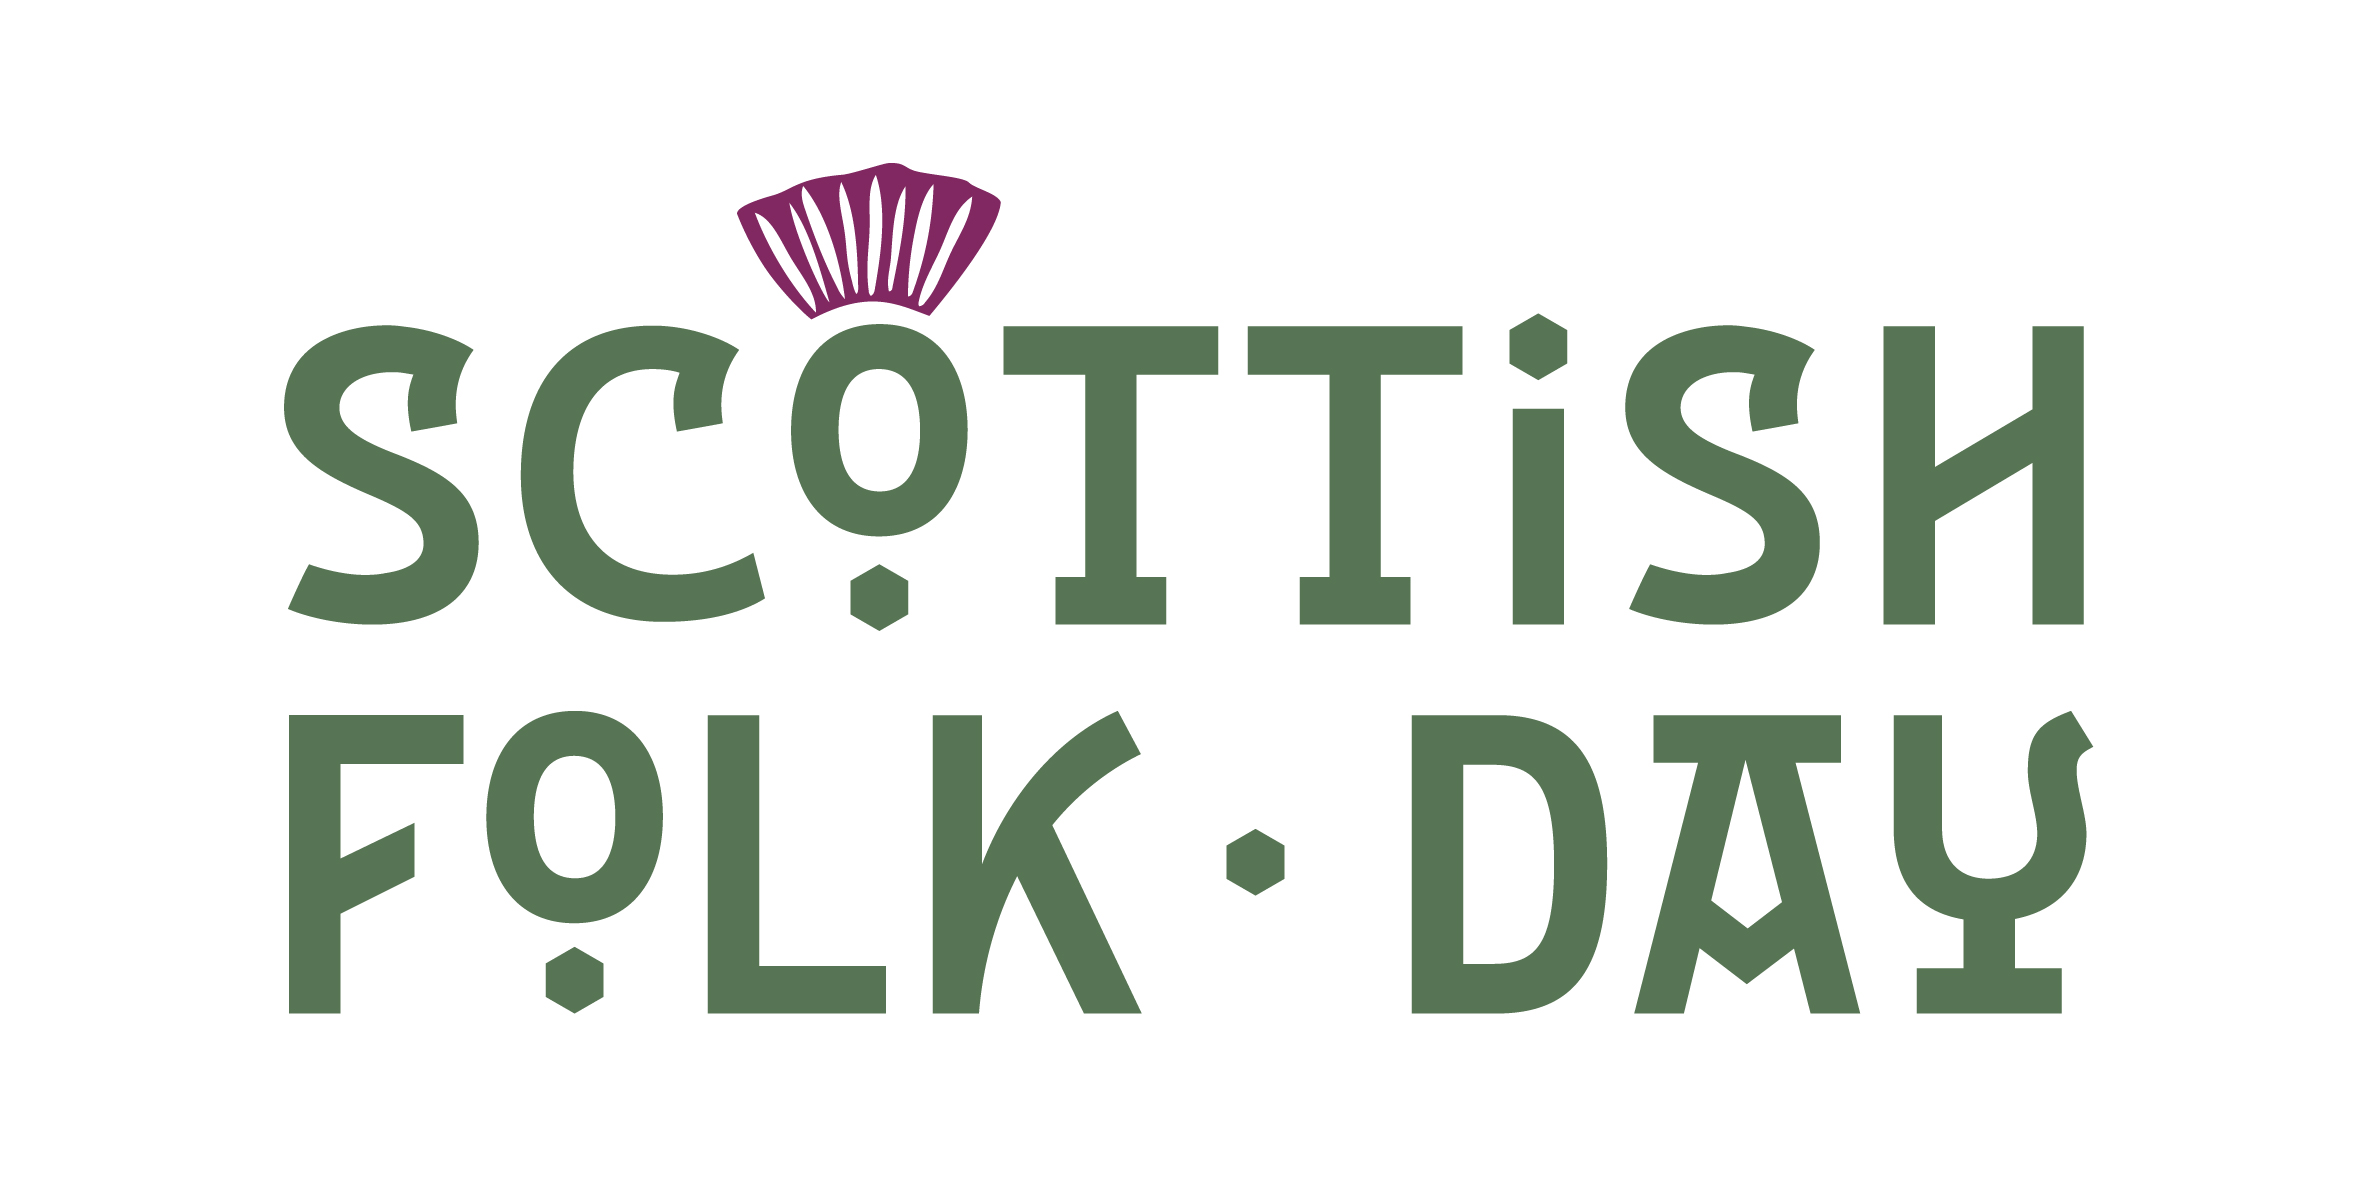 The first ever Scottish folk day will take place on 23 September ...